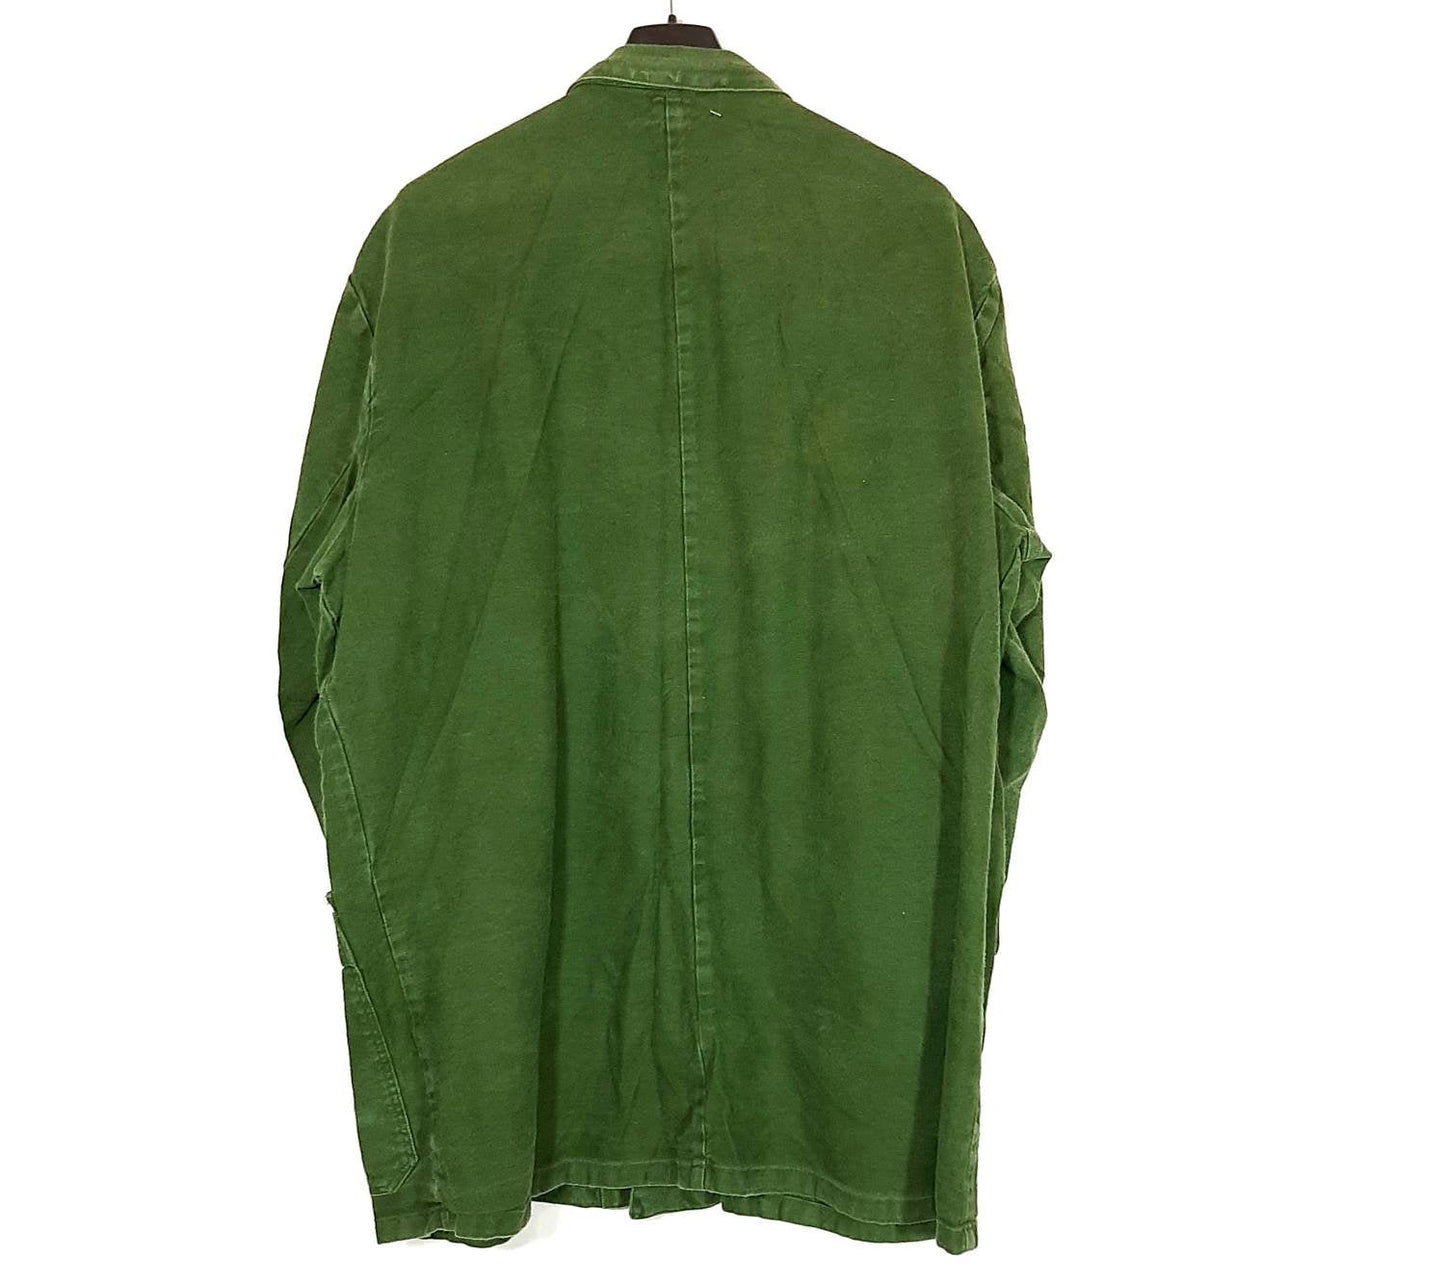 Vintage classic military denim green jacket. In good conditions